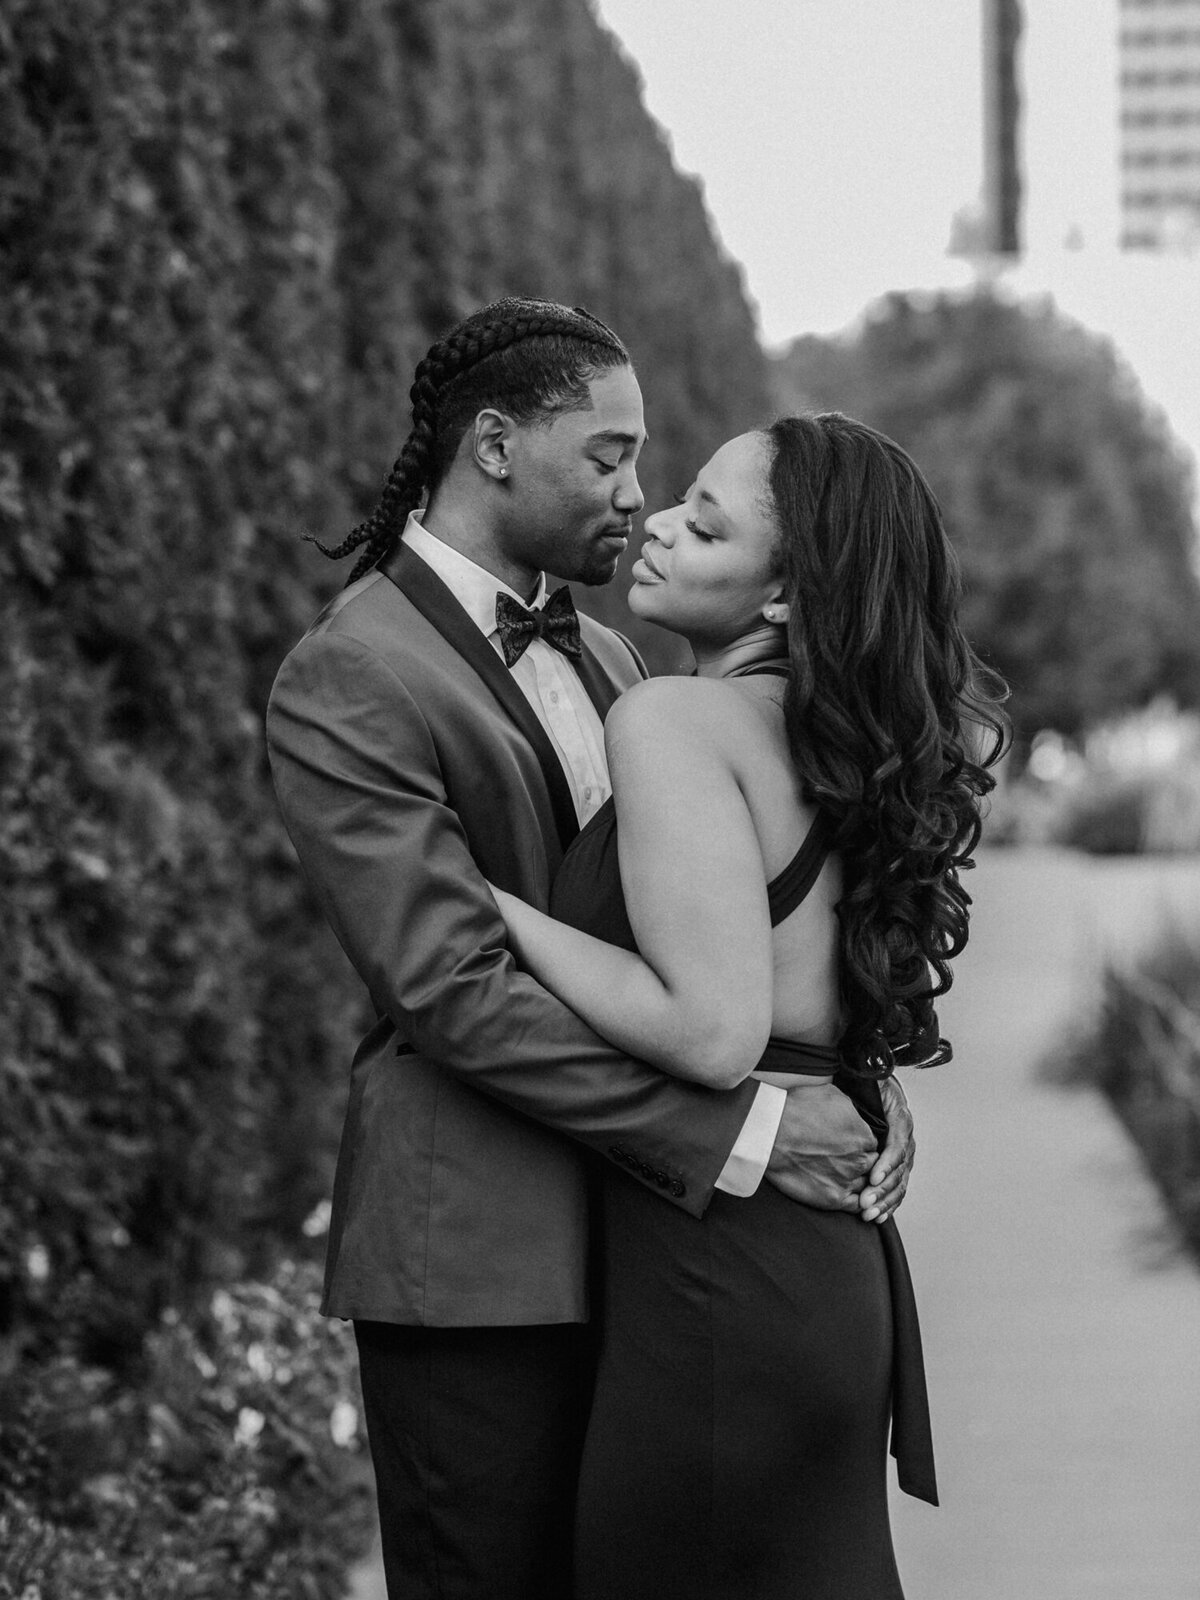 A sensual black and white editorial engagement photo taken in Chicago